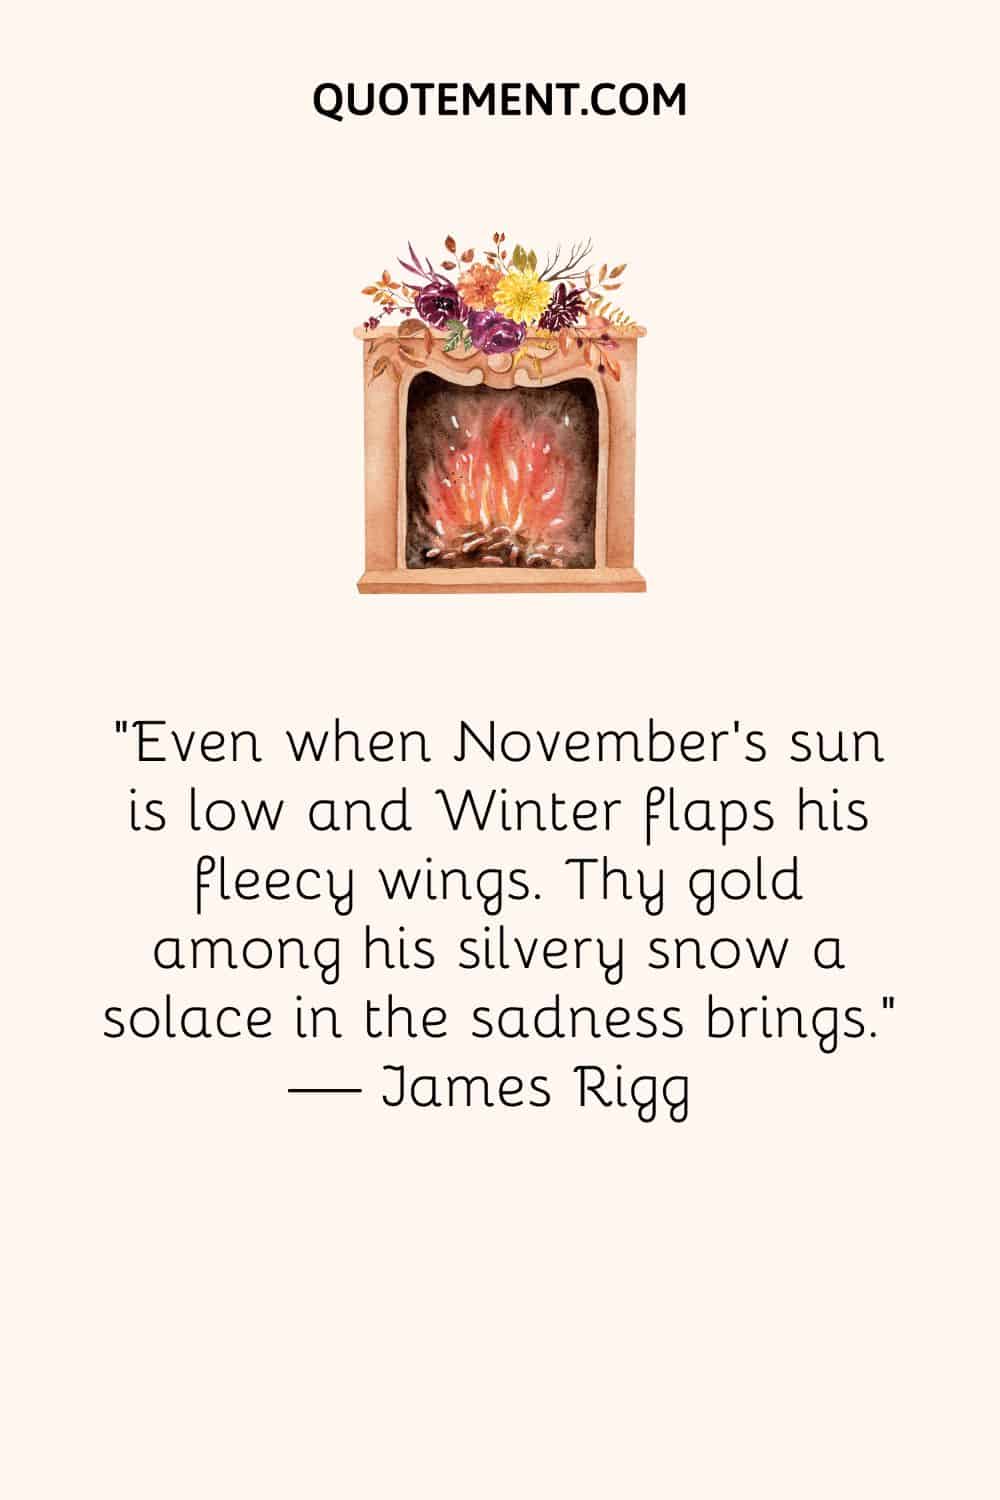 Even when November’s sun is low and Winter flaps his fleecy wings. Thy gold among his silvery snow a solace in the sadness brings